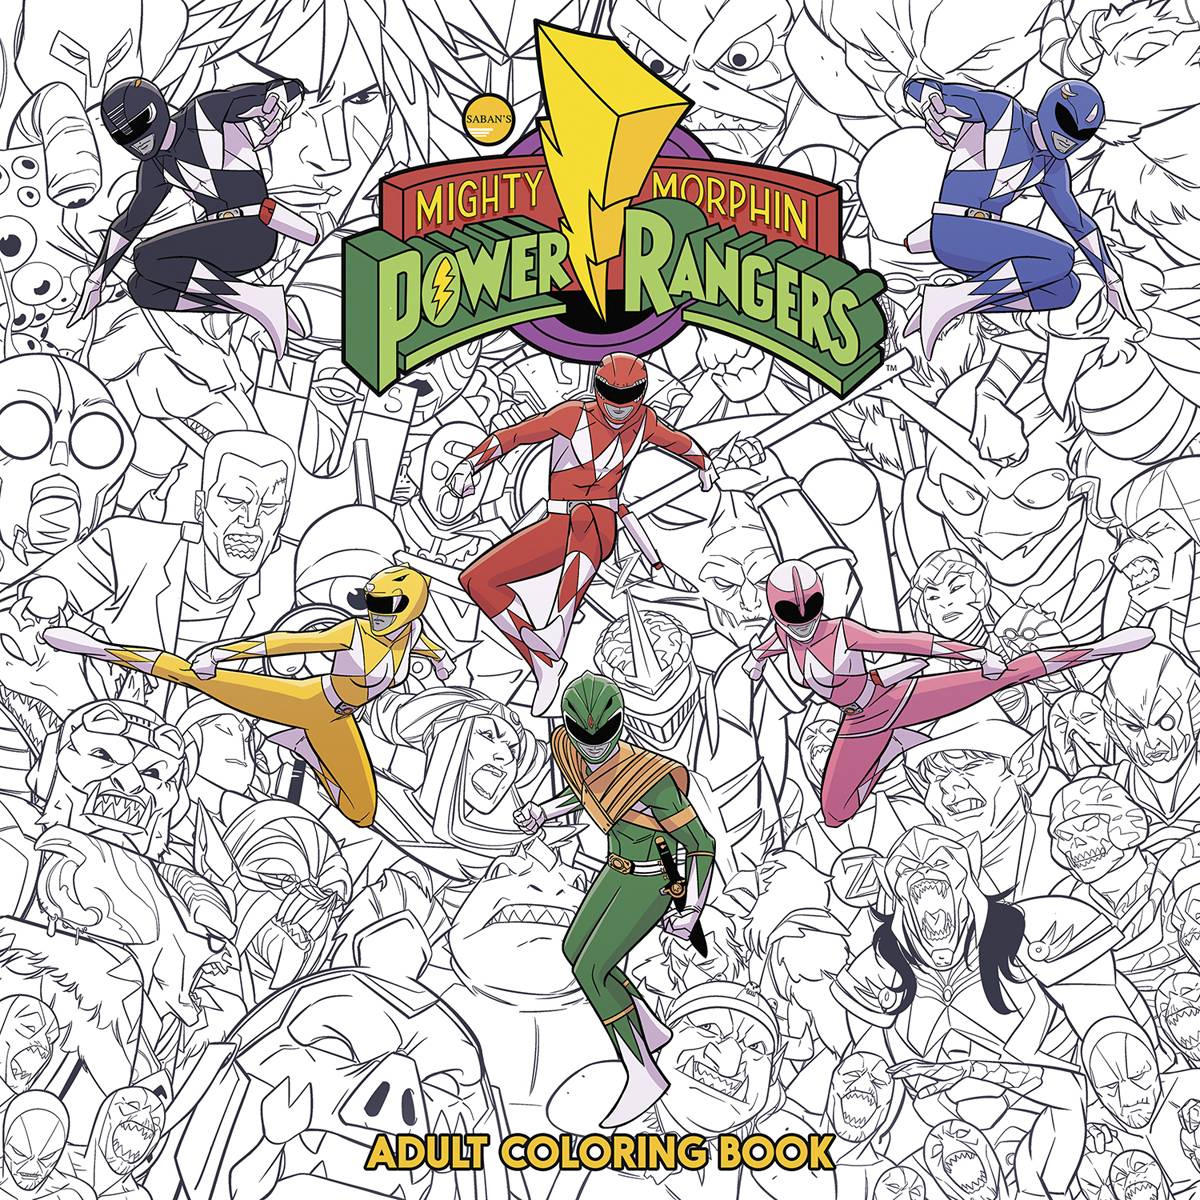 Mighty Morphin Power Rangers Adult Coloring Book Graphic Novel